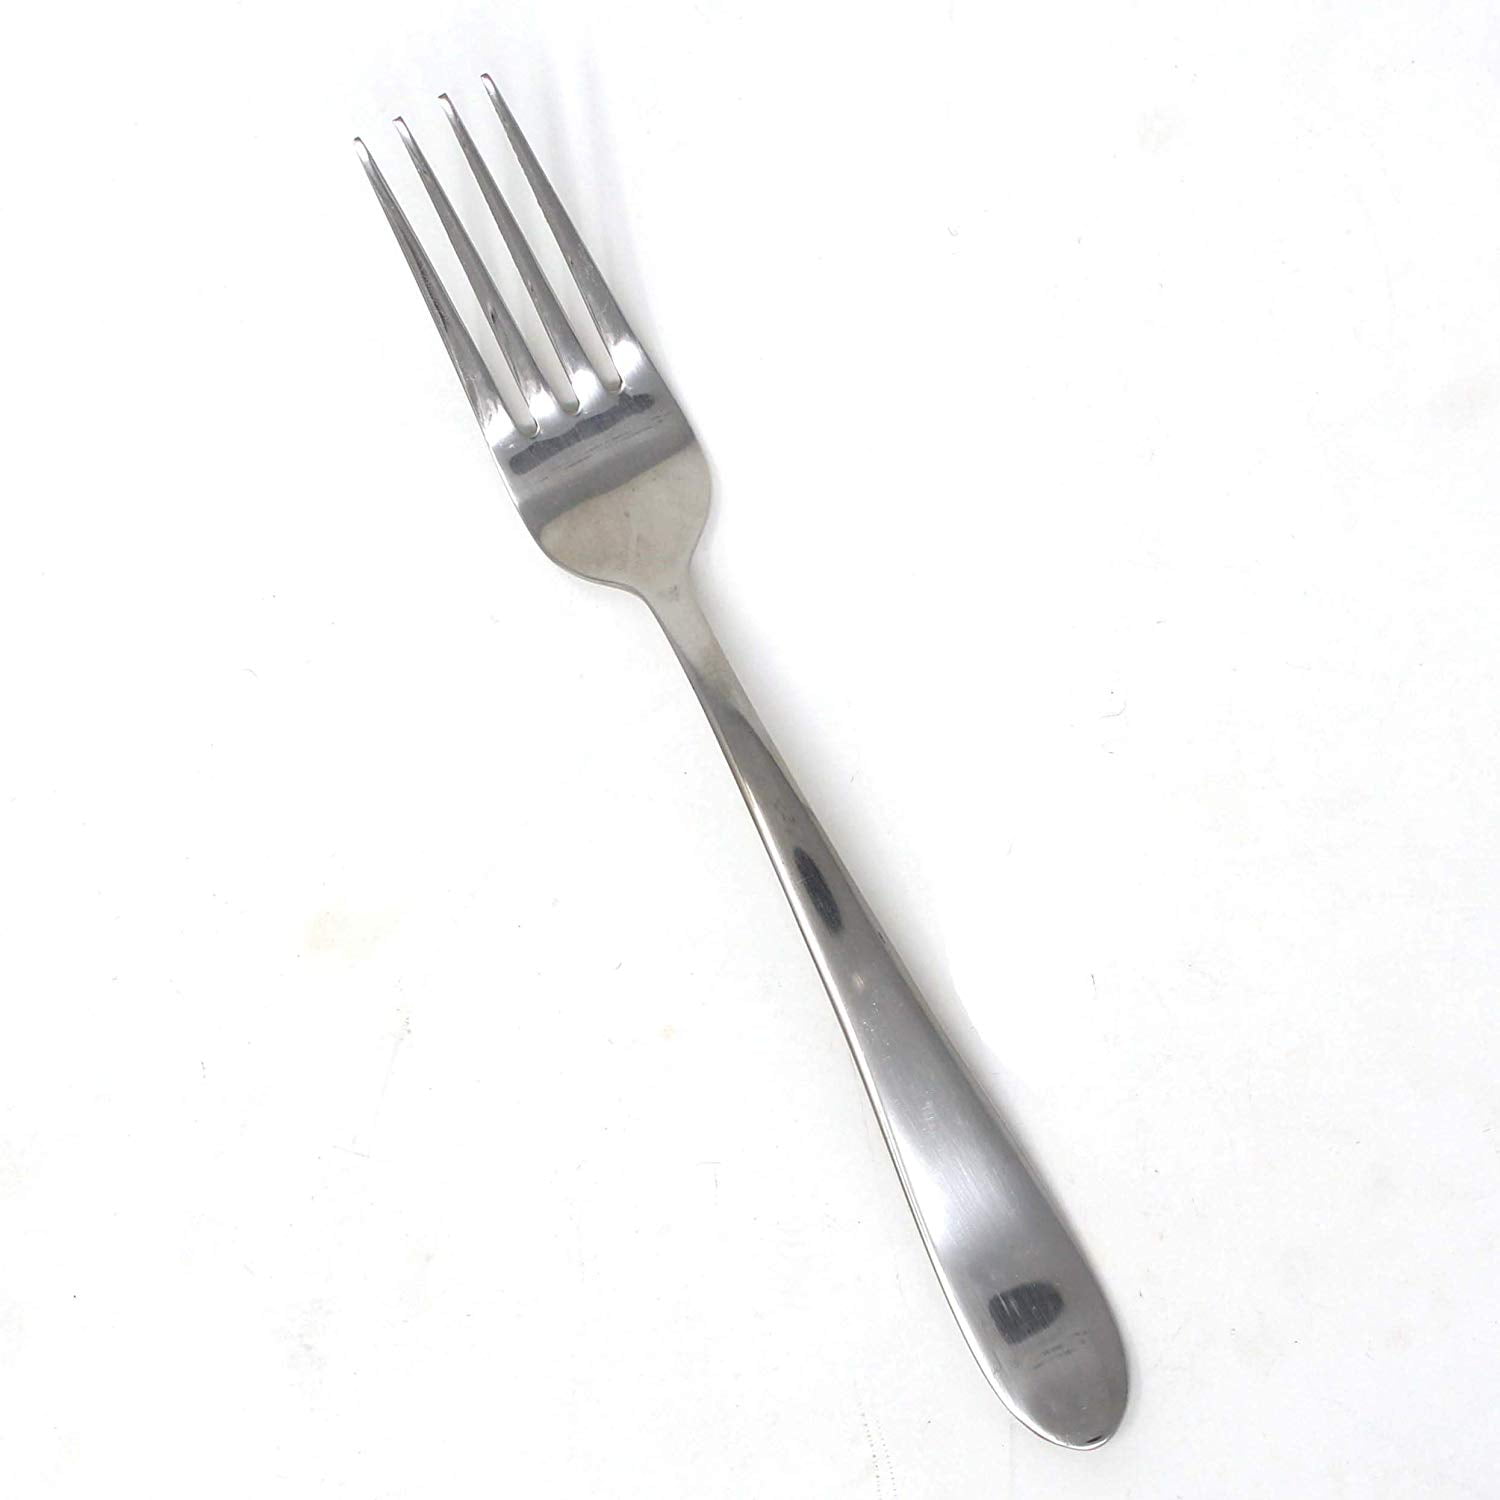 12 RIVA DINNER FORKS HEAVY WEIGHT BY BRANDWARE FREE SHIPPING USA ONLY 